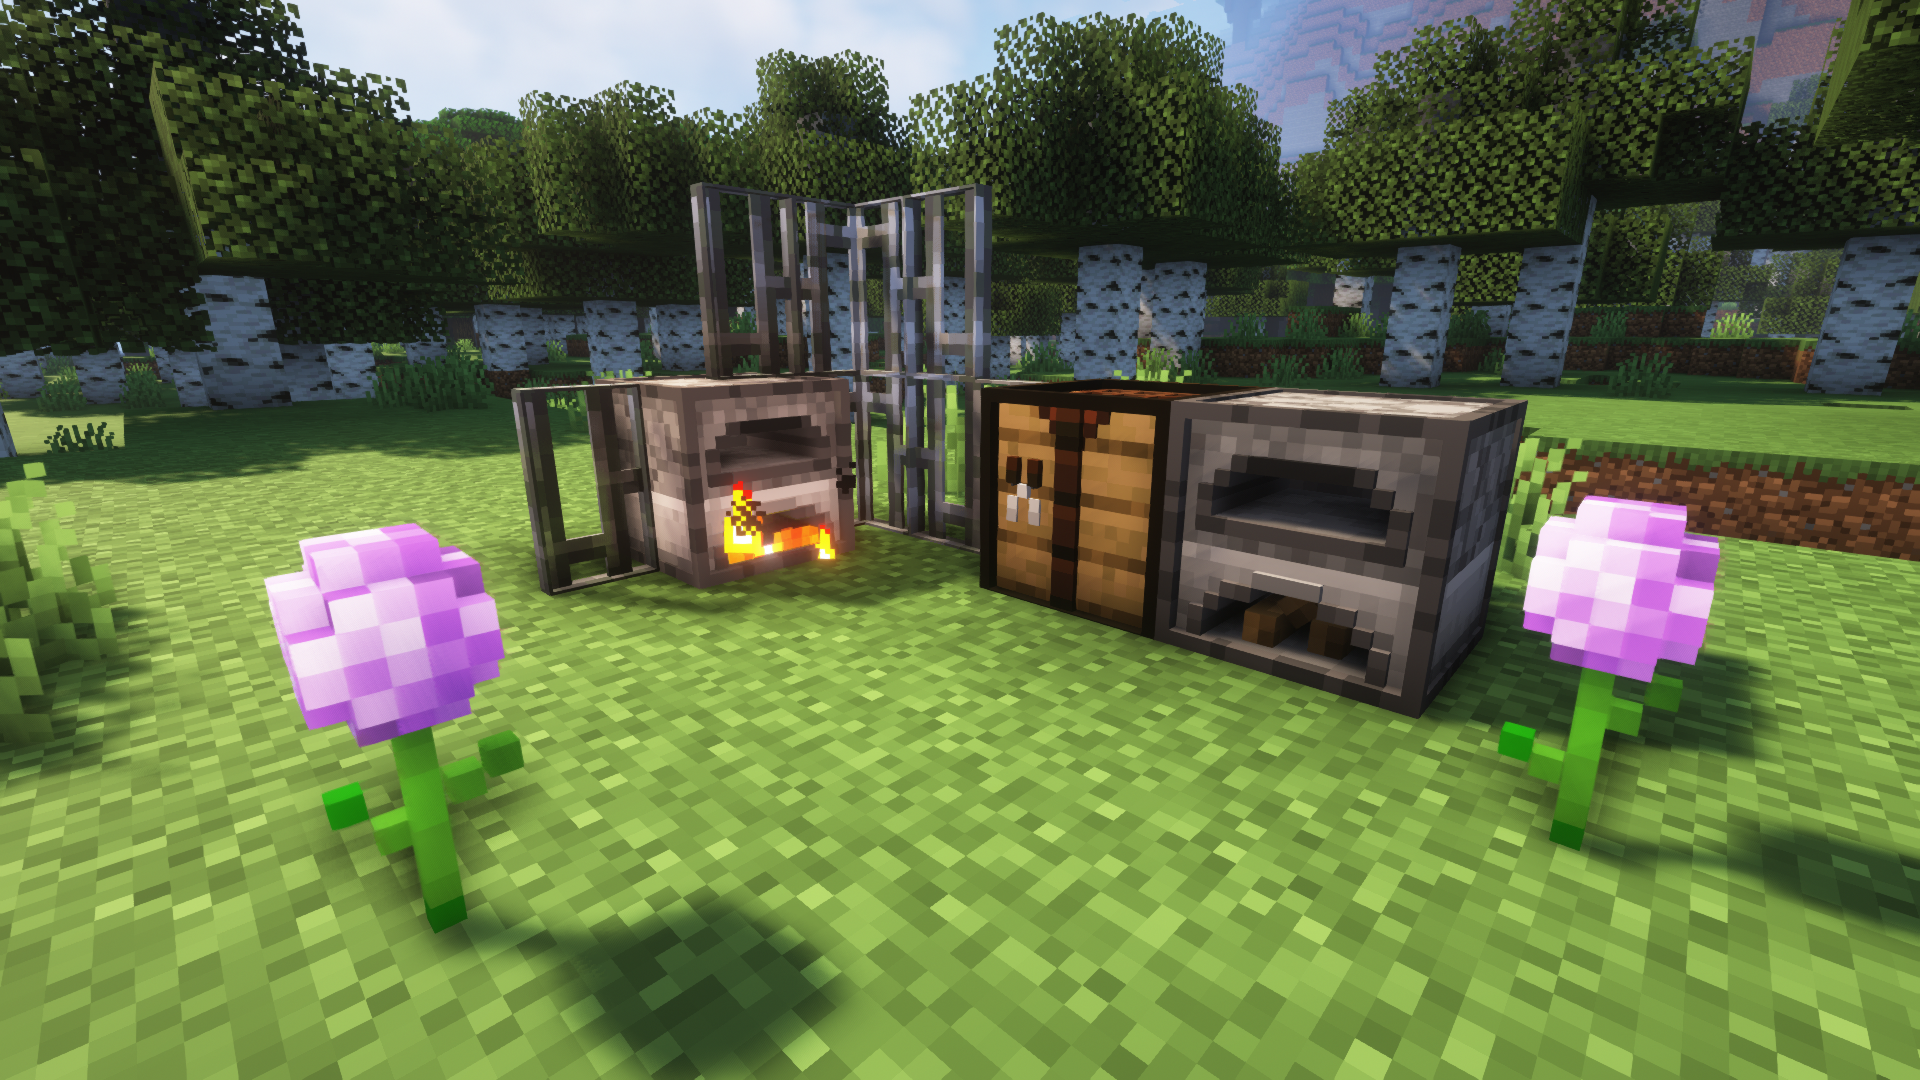 In game screenshot of crafting table, furnace, allium and iron bars.